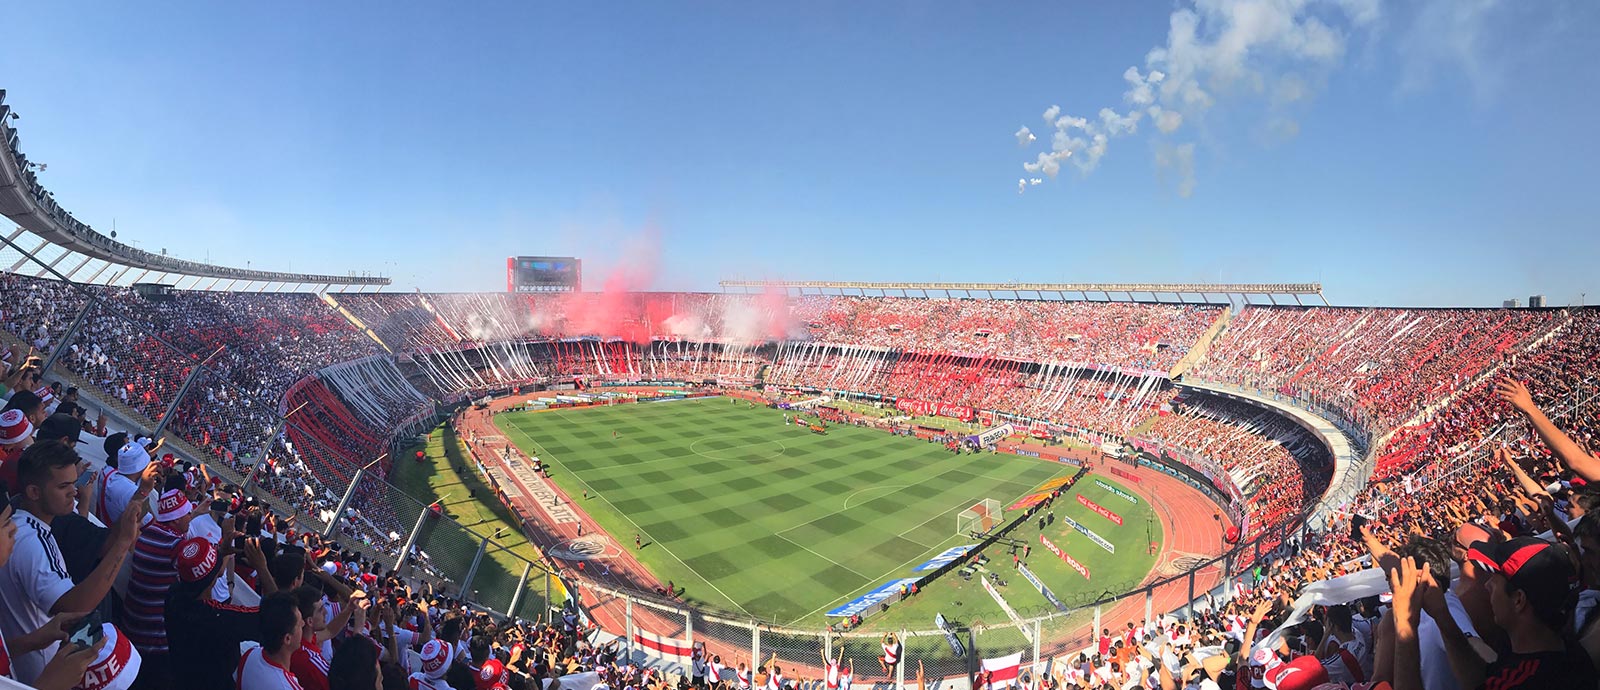 Estadio Monumental full of people to watch football derby in Buenos Aires. The biggest derby in the world